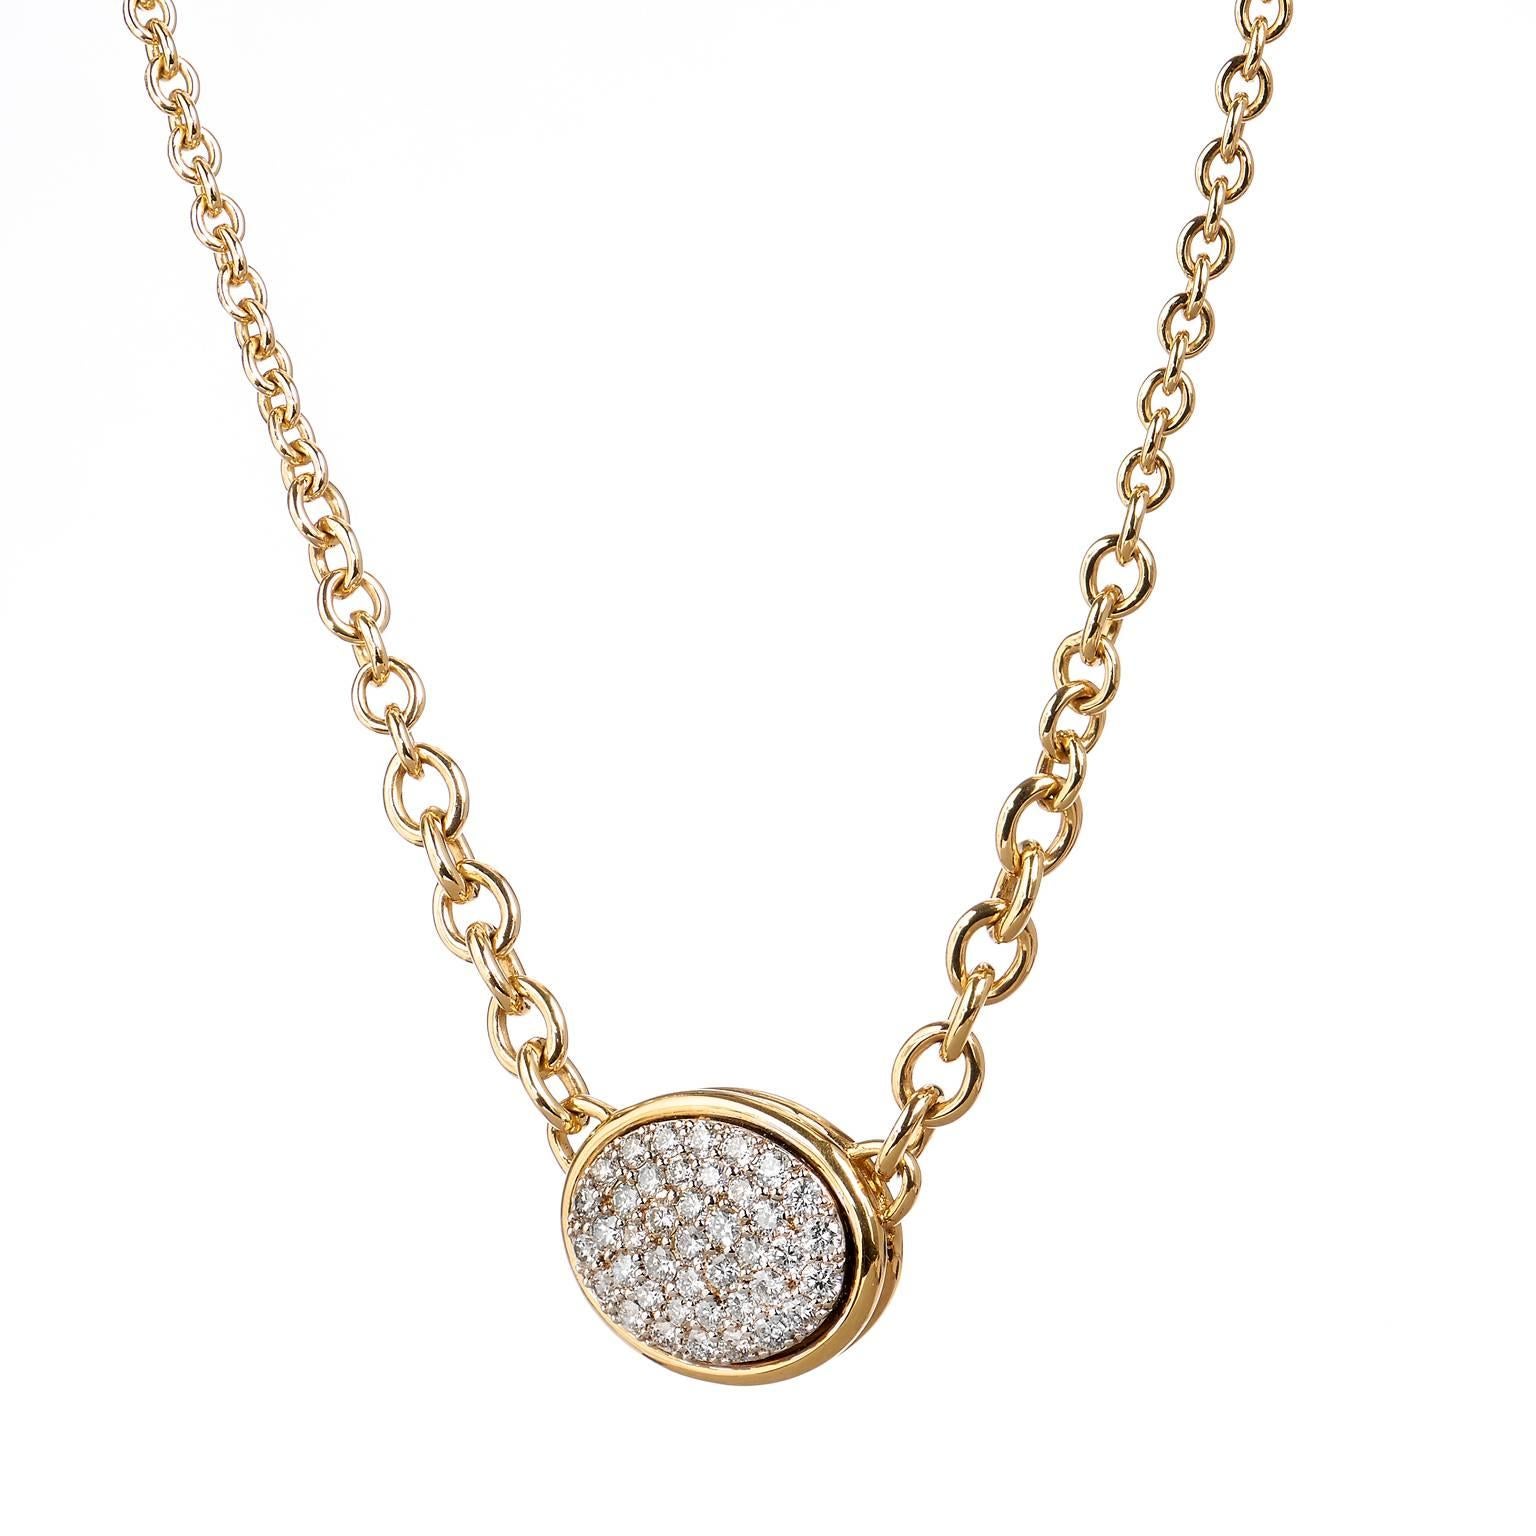 1.99 carats of Diamonds Set in 14 karat Gold Oval Shaped Pave Necklace 17 inches

This necklace showcases an oval shape pendant that features 1.99 carats of G-SI graded pave set diamonds for scintillating appeal upon the neck. The pendant is